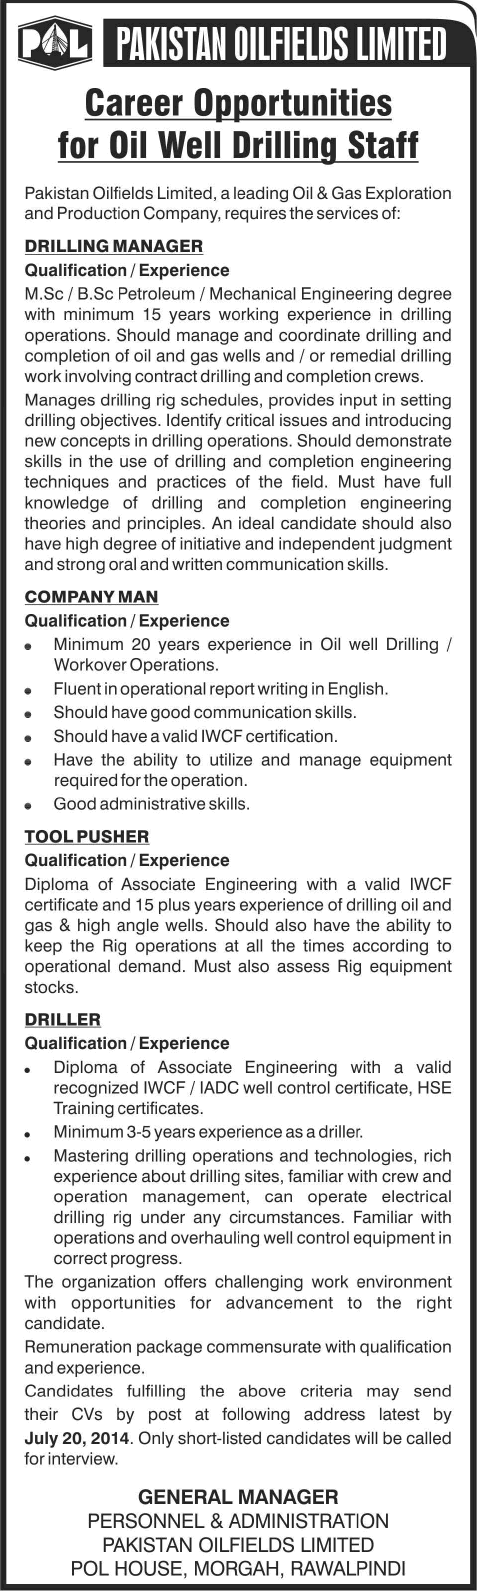 Pakistan Oilfields Limited Jobs 2014 July for Drilling Manager, Company Man, Tool Pusher & Driller